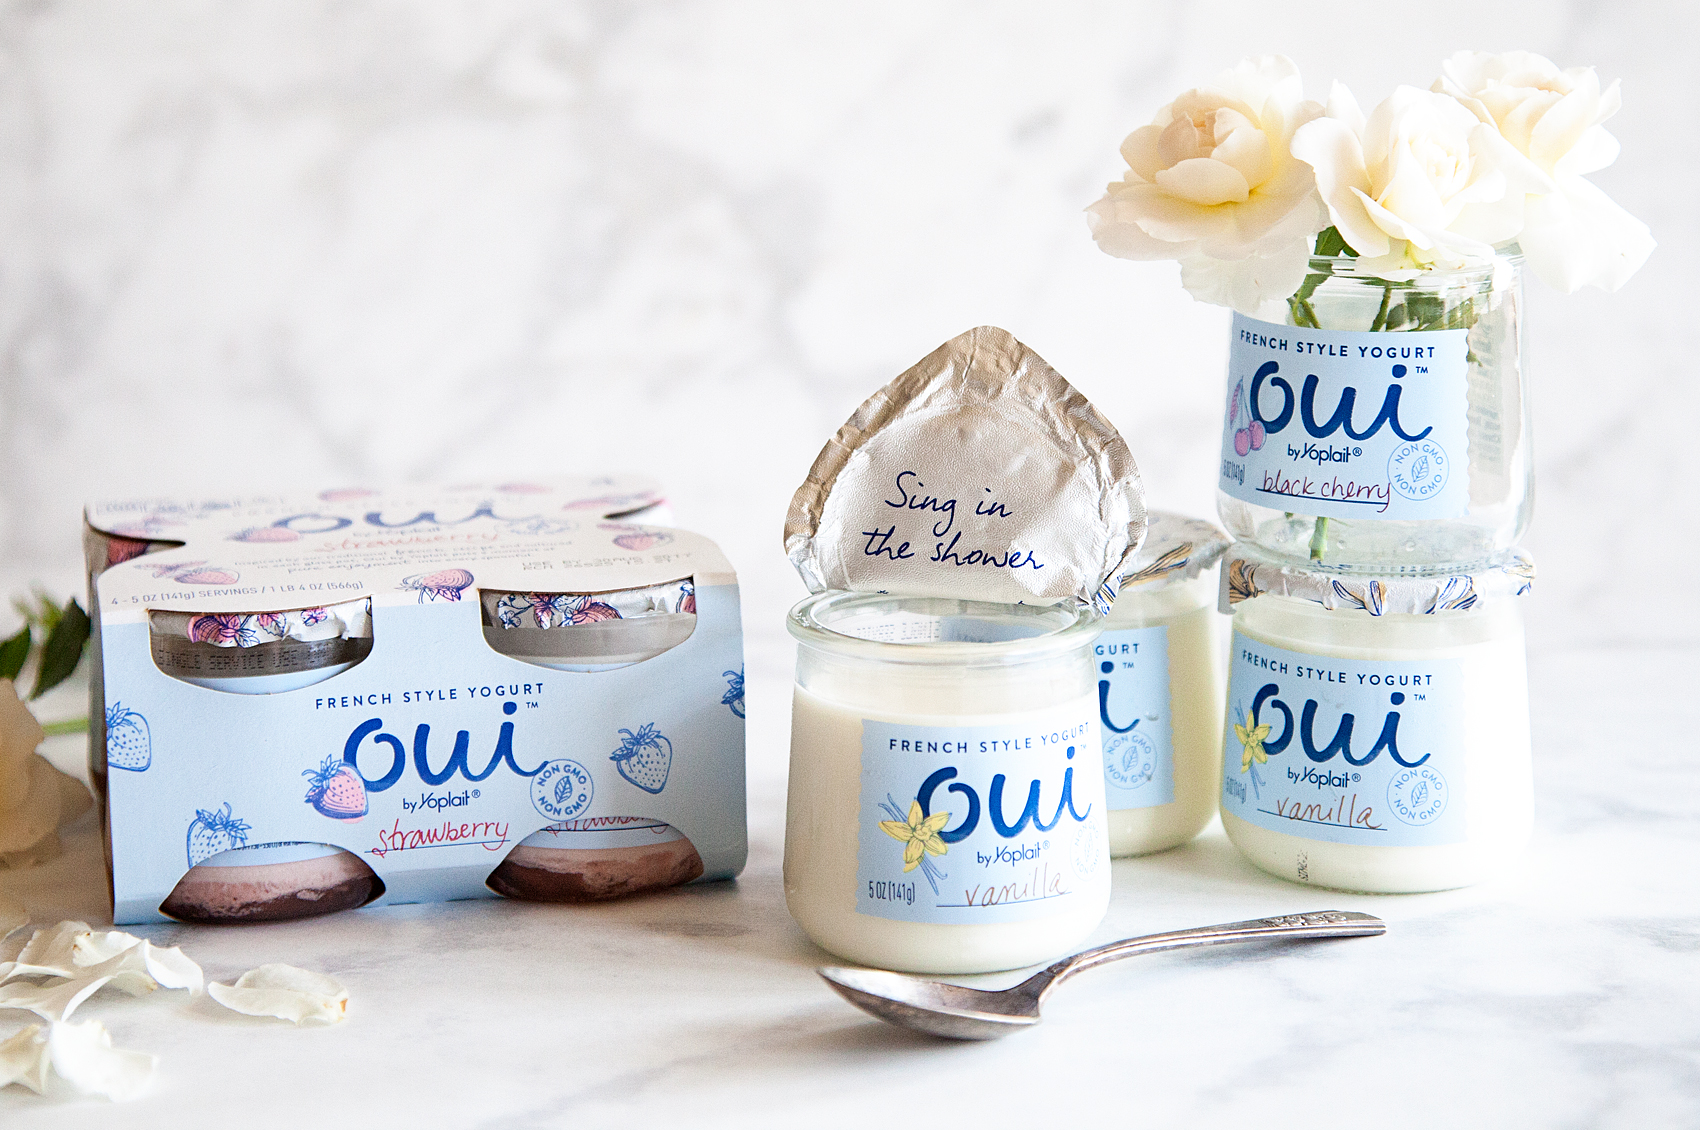 Take a little bit of ME time with Yoplait Oui yogurt and WhipperBerry